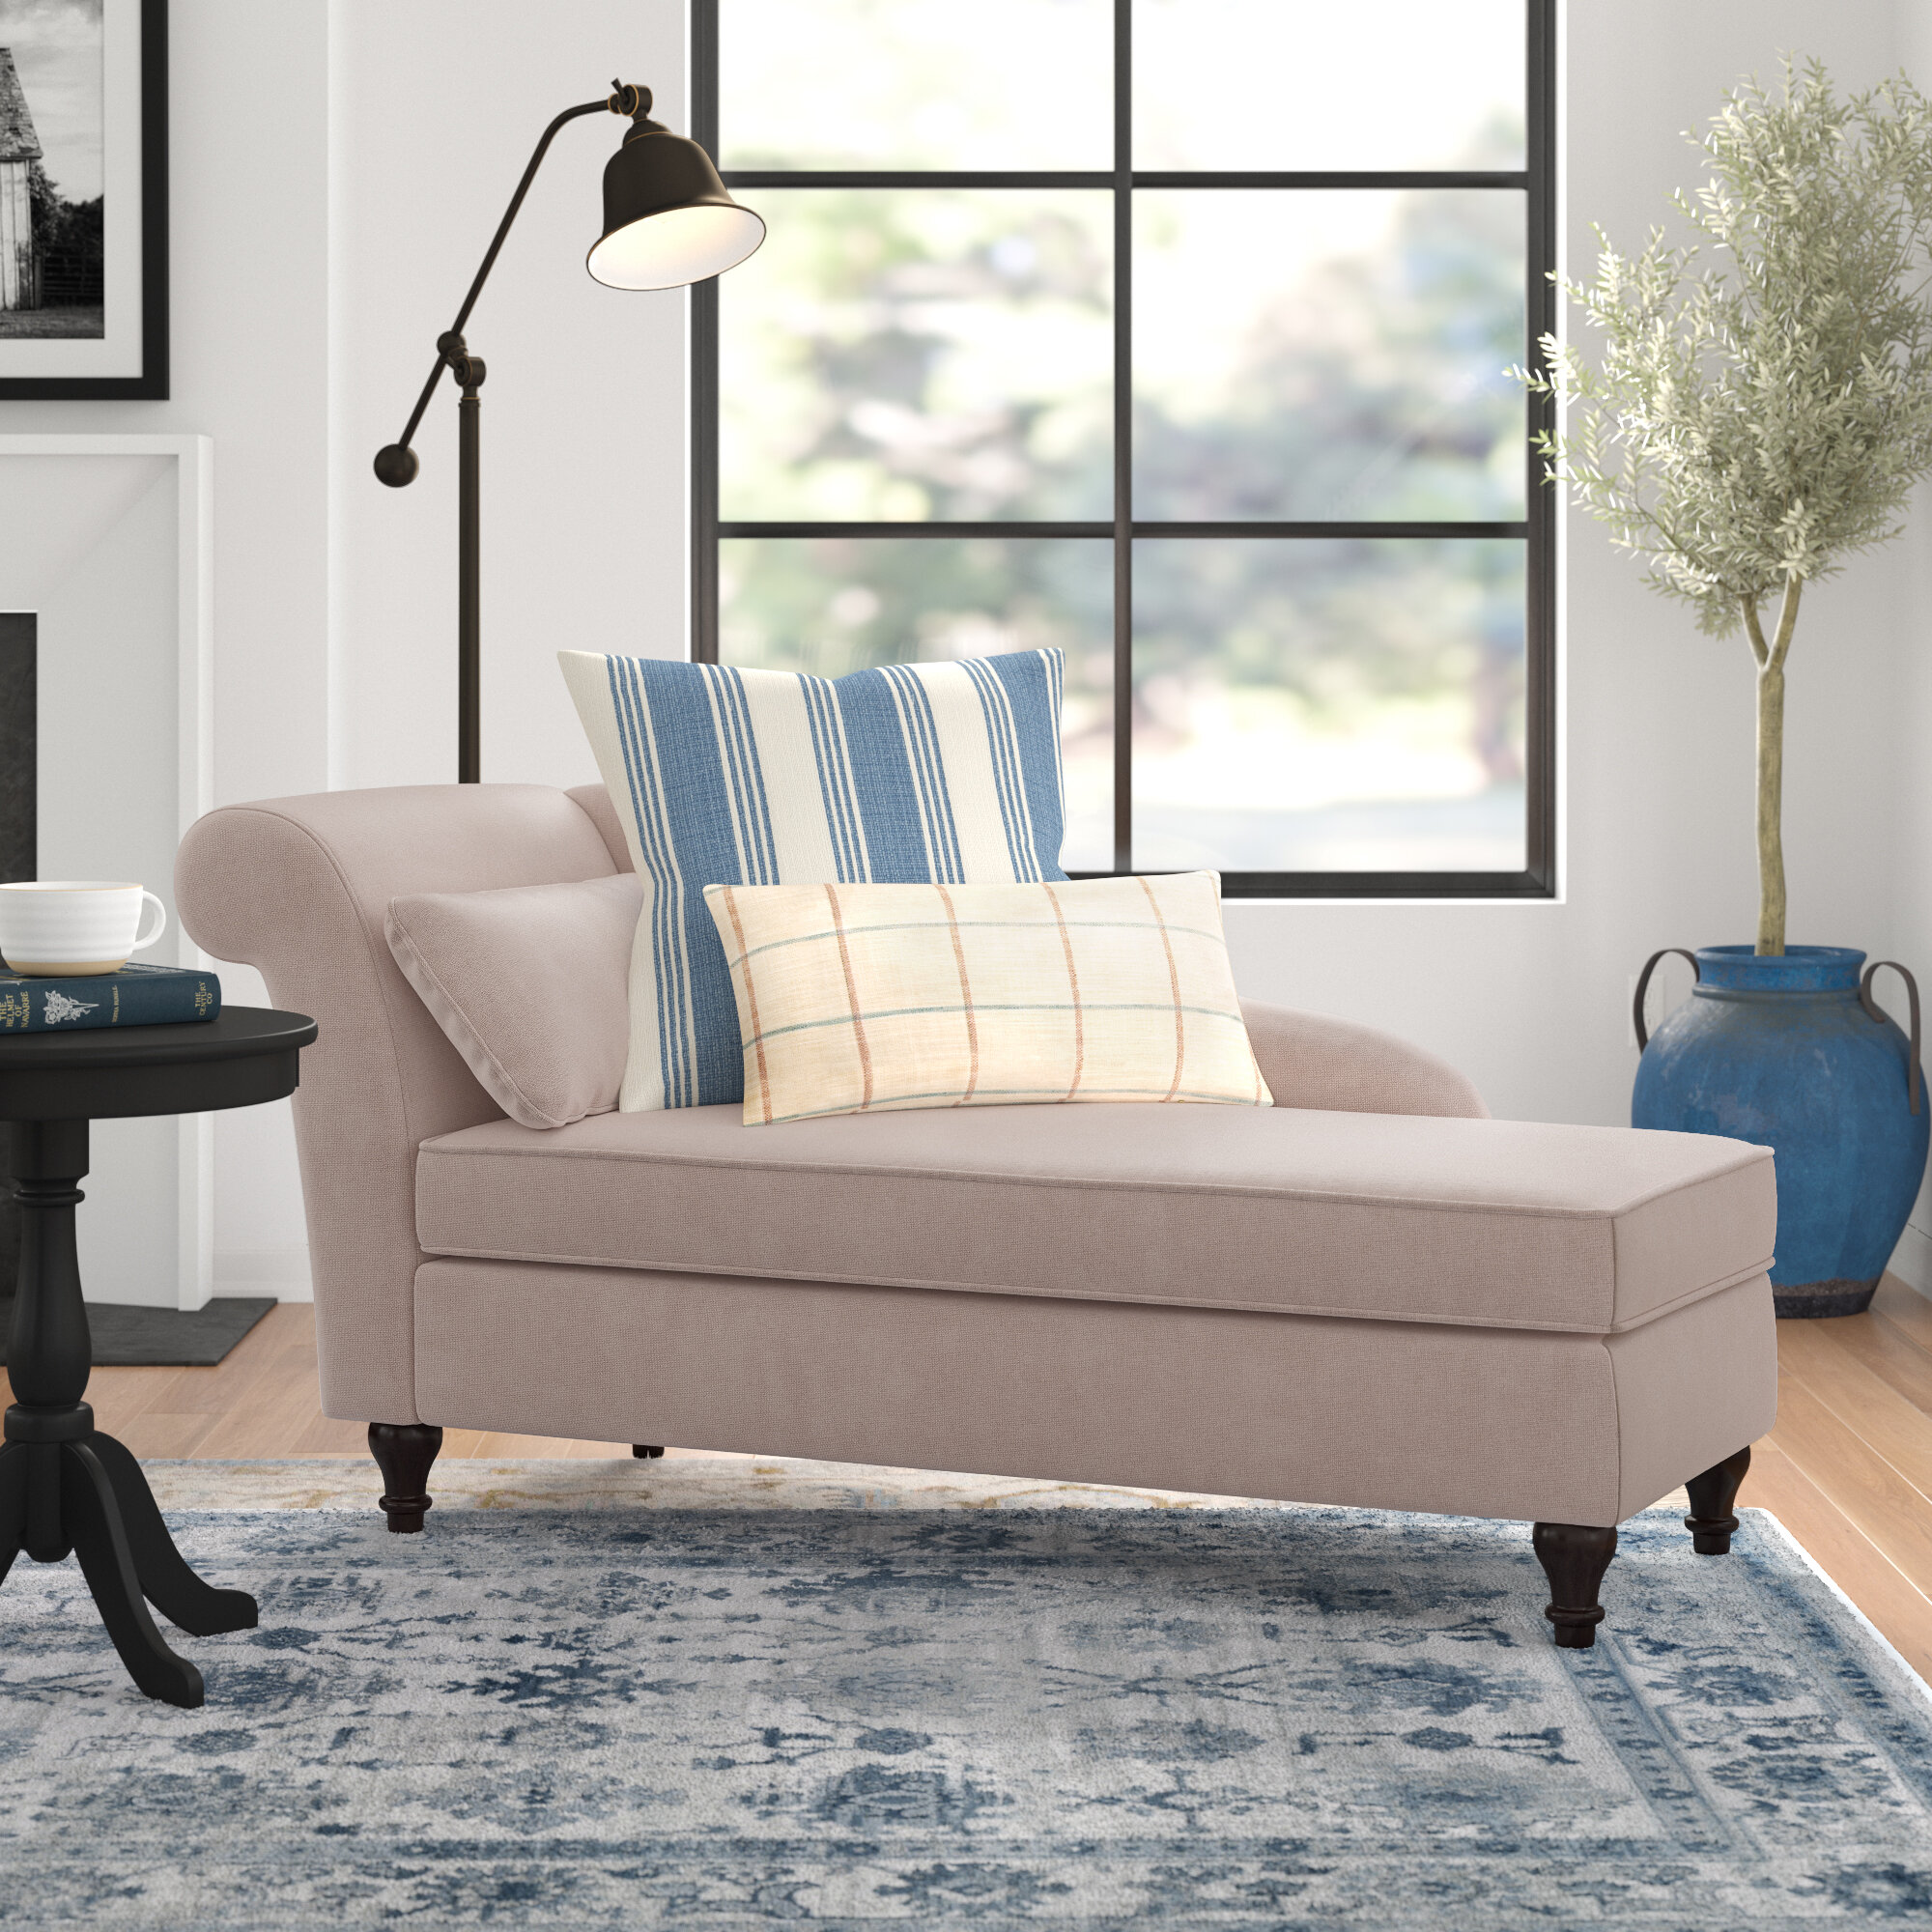 Rhoda Upholstered Chaise Lounge